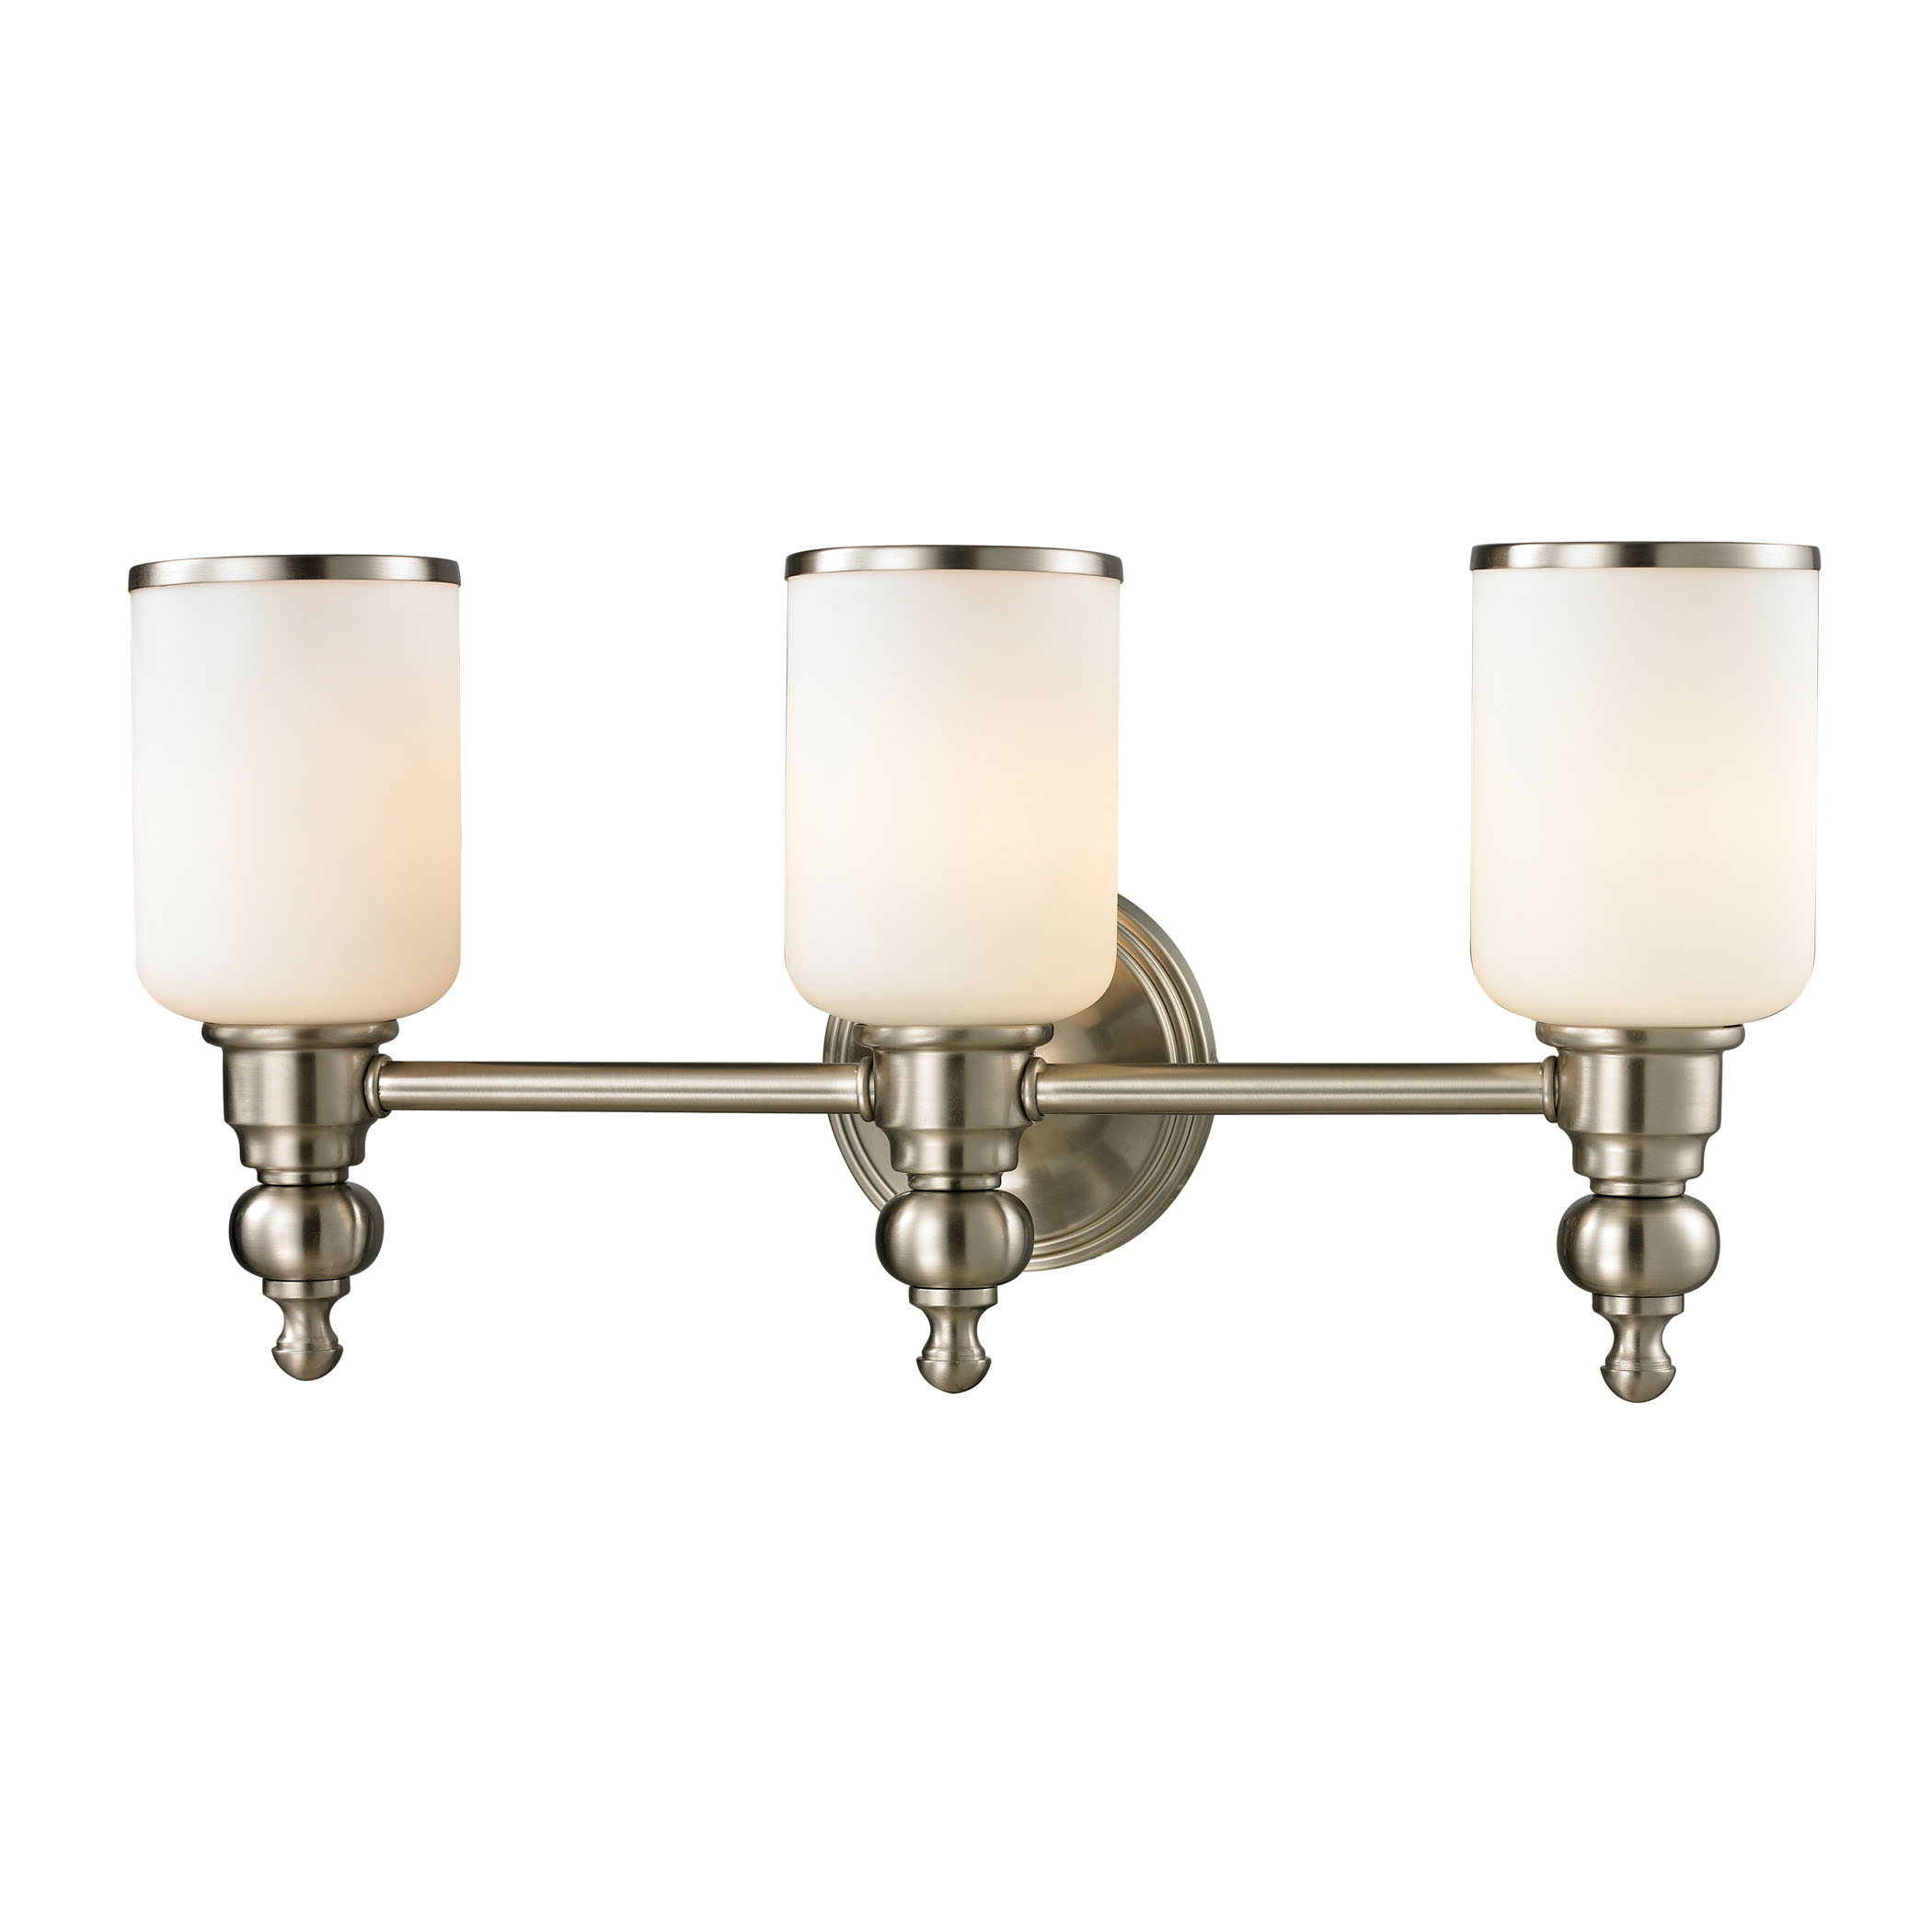 Bristol Collection 3 light bath in Brushed Nickel